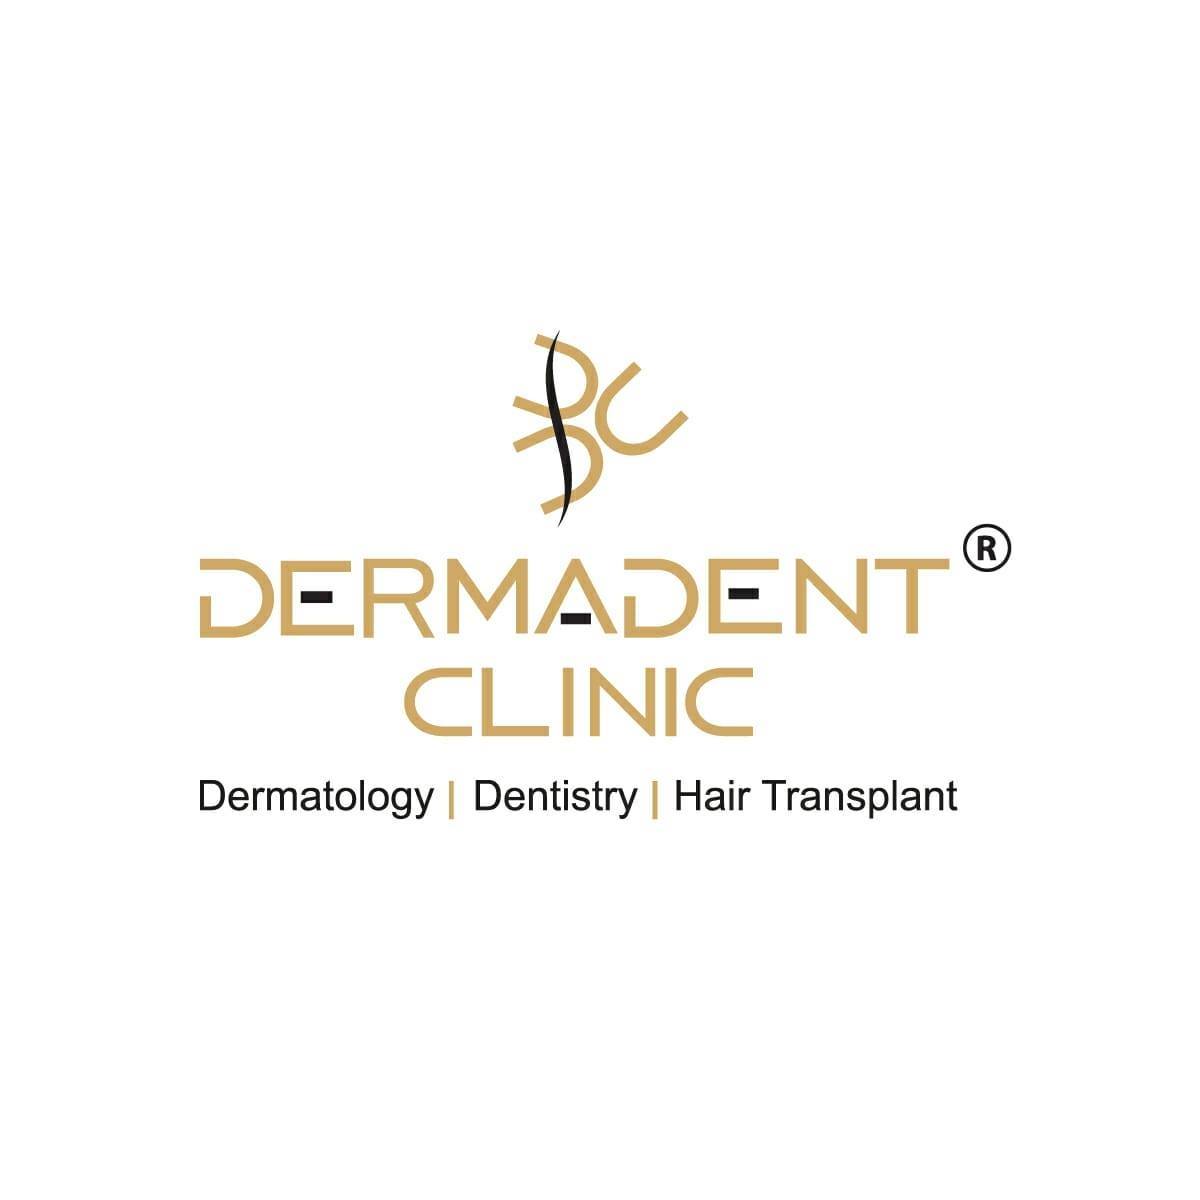 DermaDent Clinic|Hospitals|Medical Services